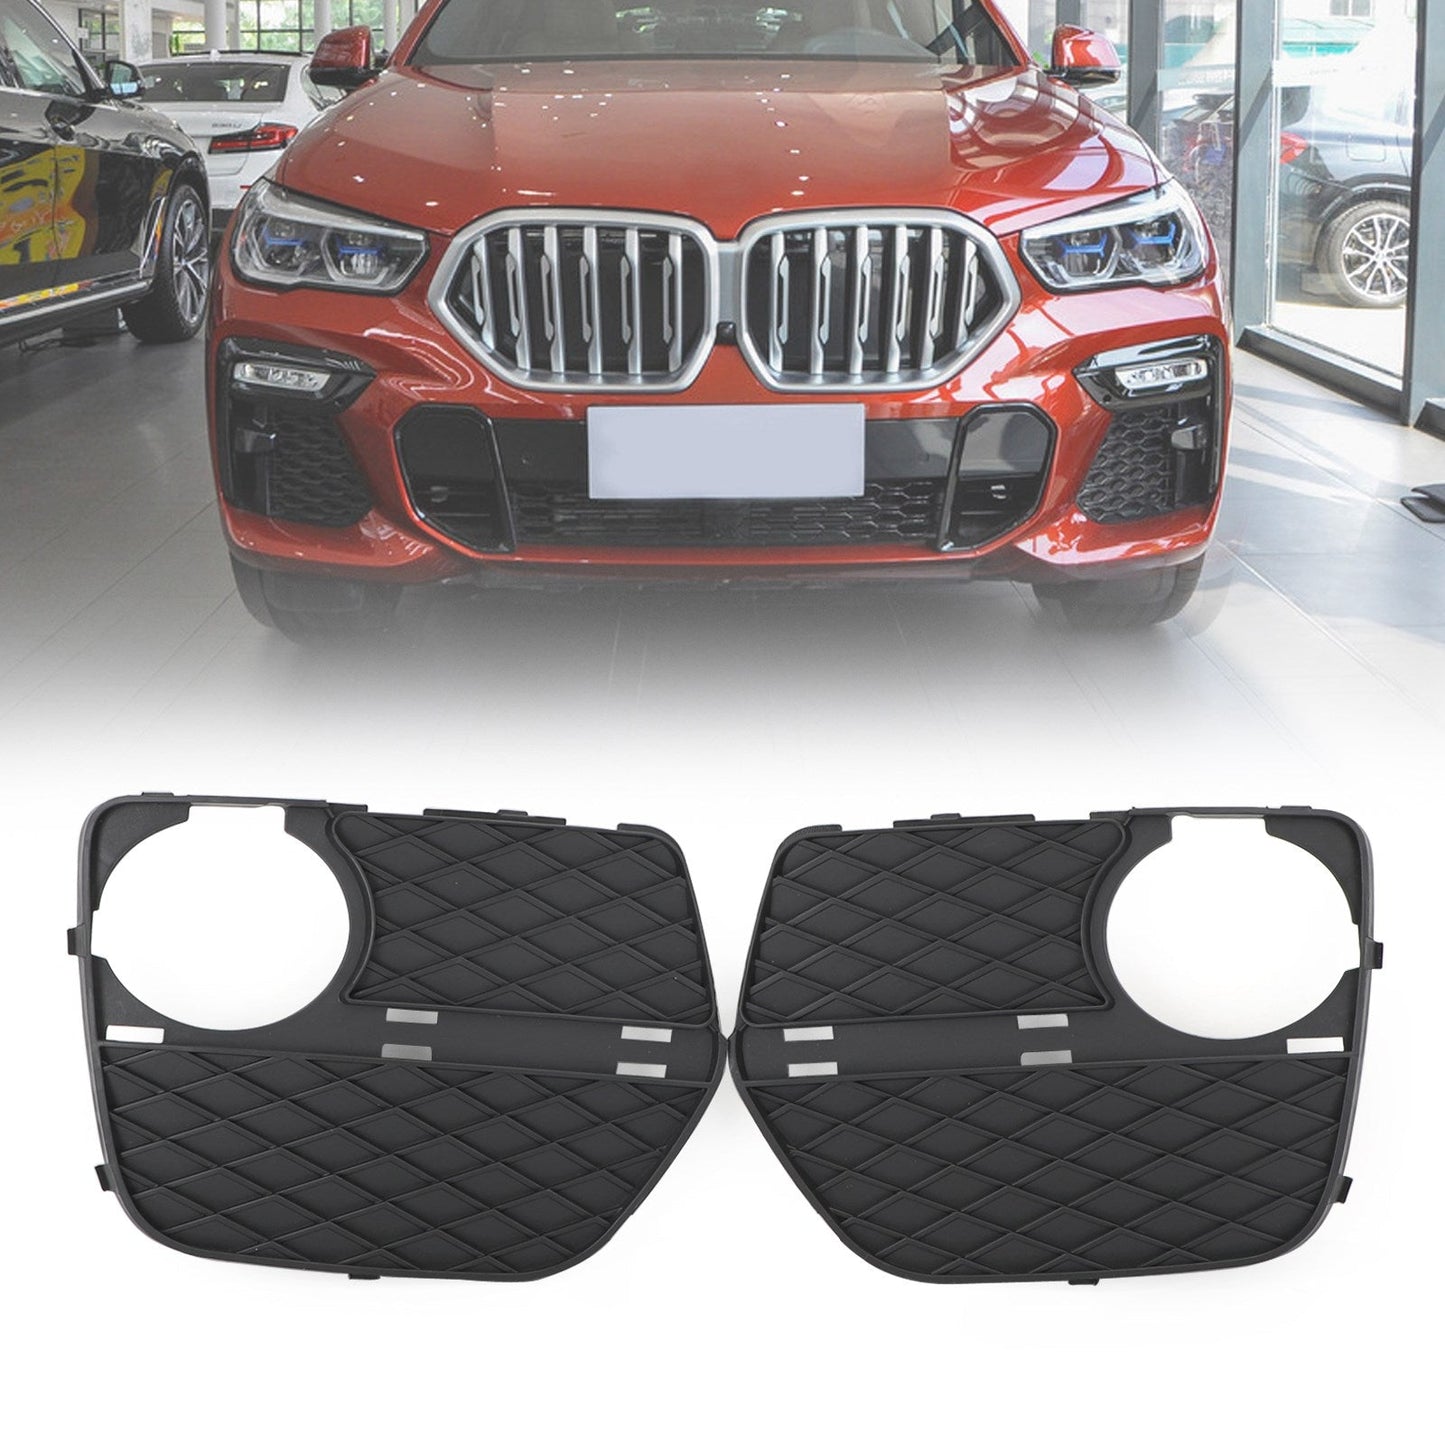 2x Front Bumper Closed Grid Fog Light Grille Left & Right Fit BMW X6 2012-2014